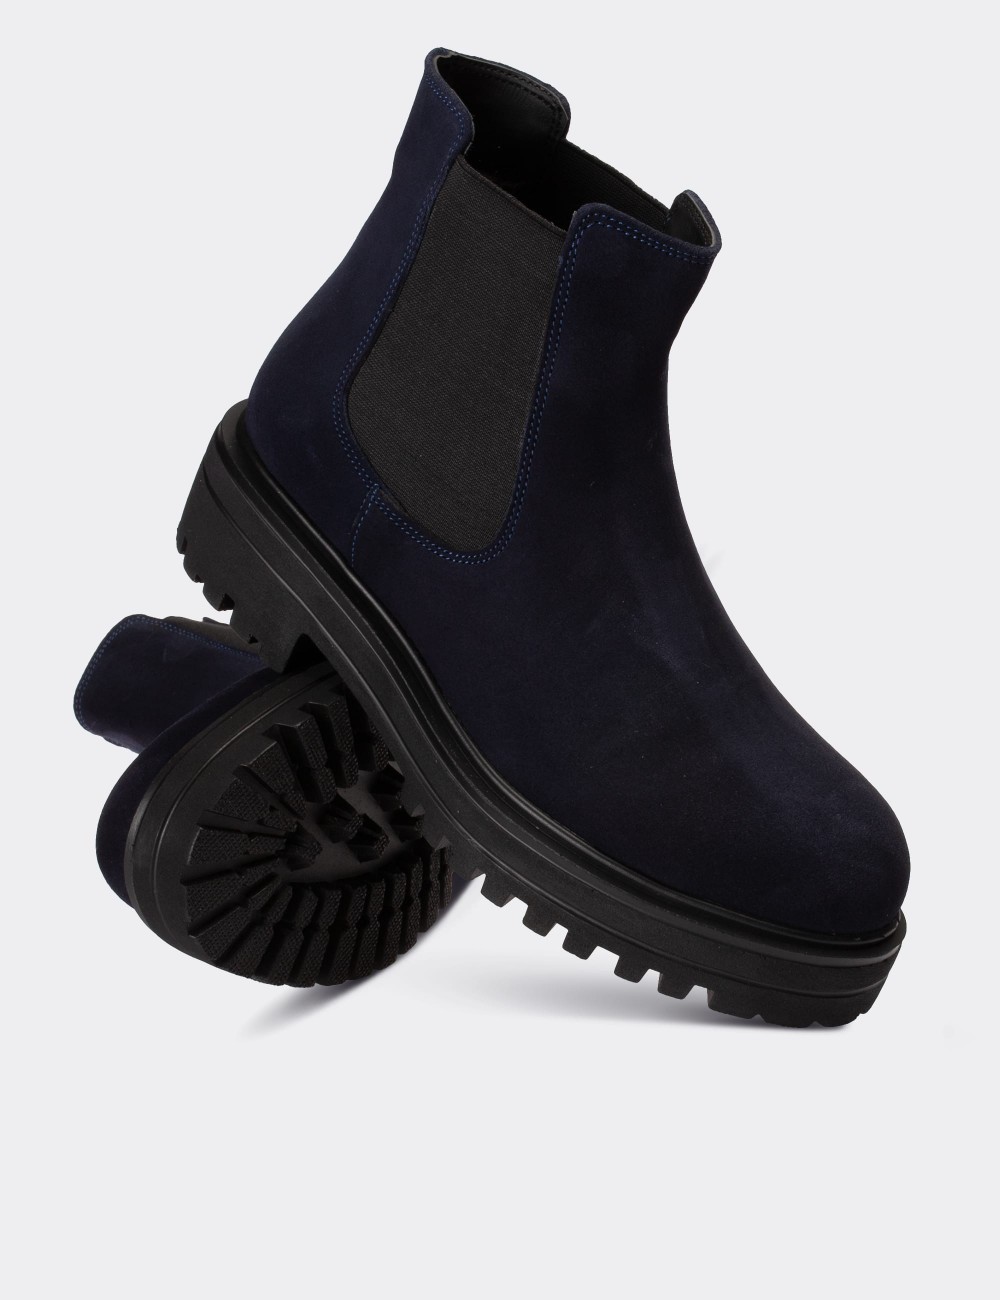 Navy Suede Leather Chelsea Boots - 01801ZLCVE01